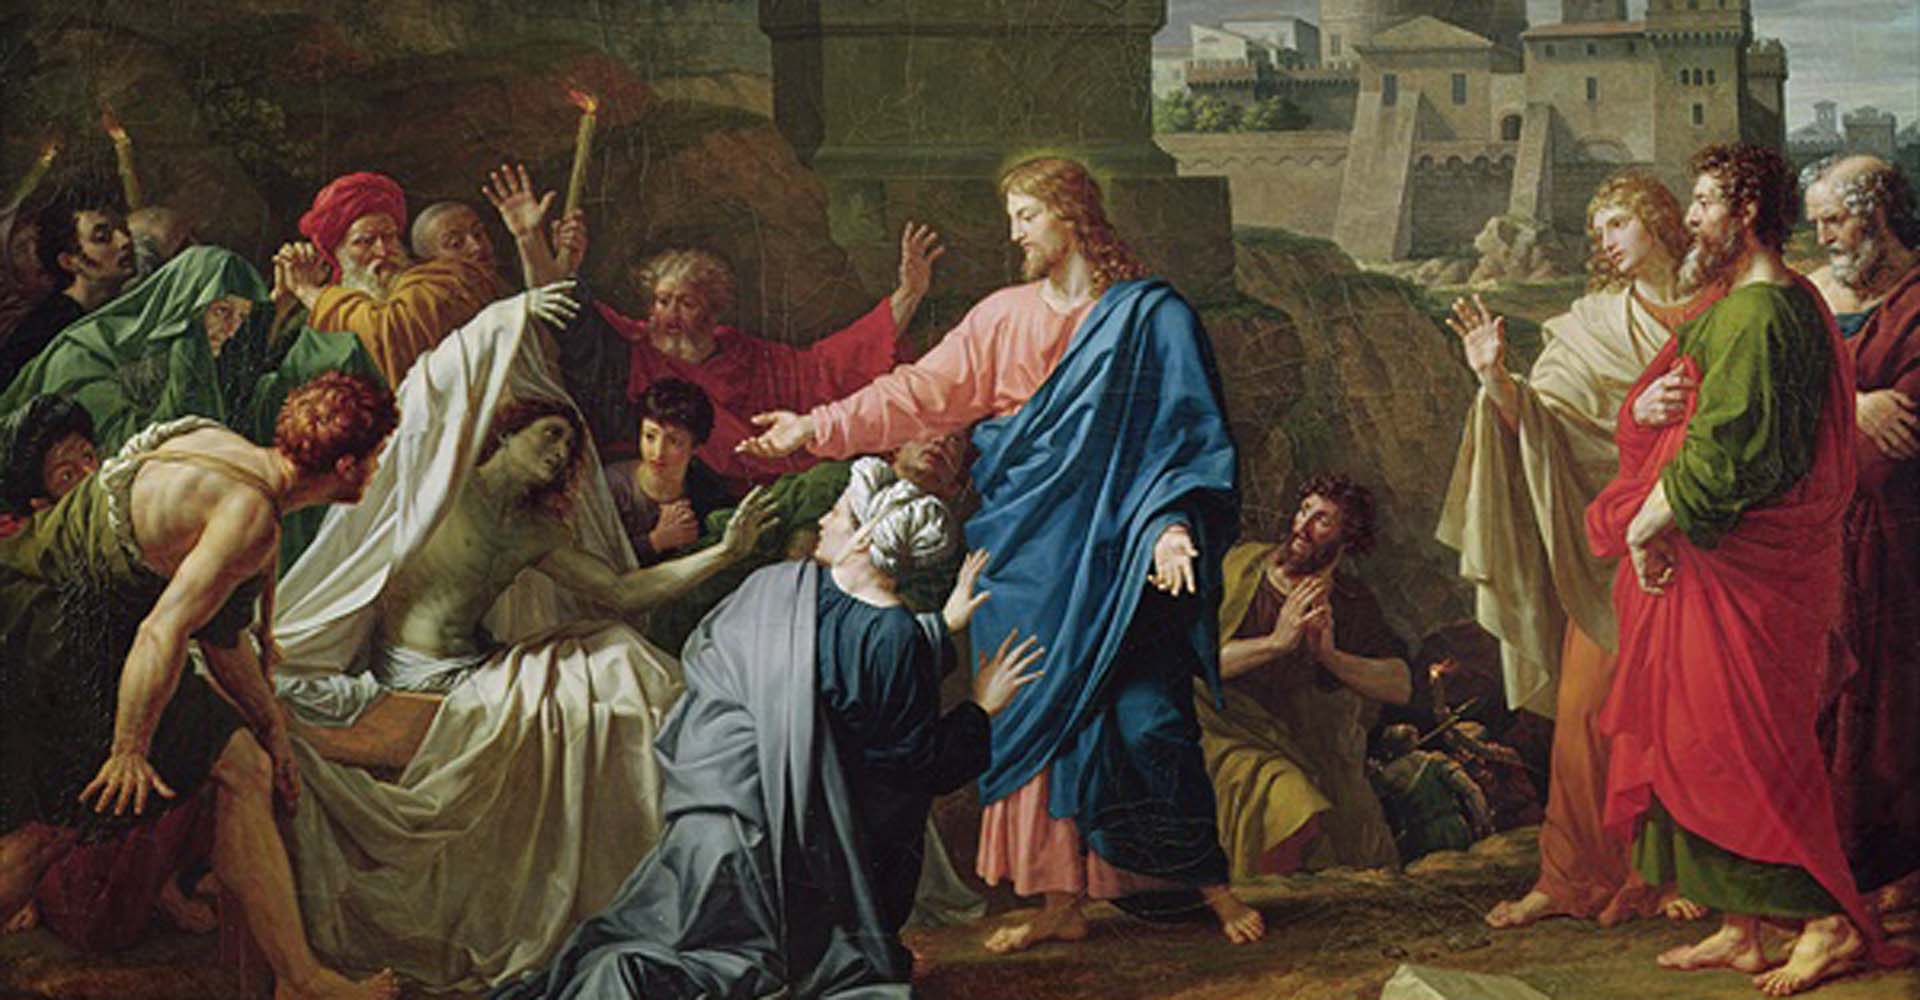 Miracle of Jesus. Jesus raises the son of the widow of Nain